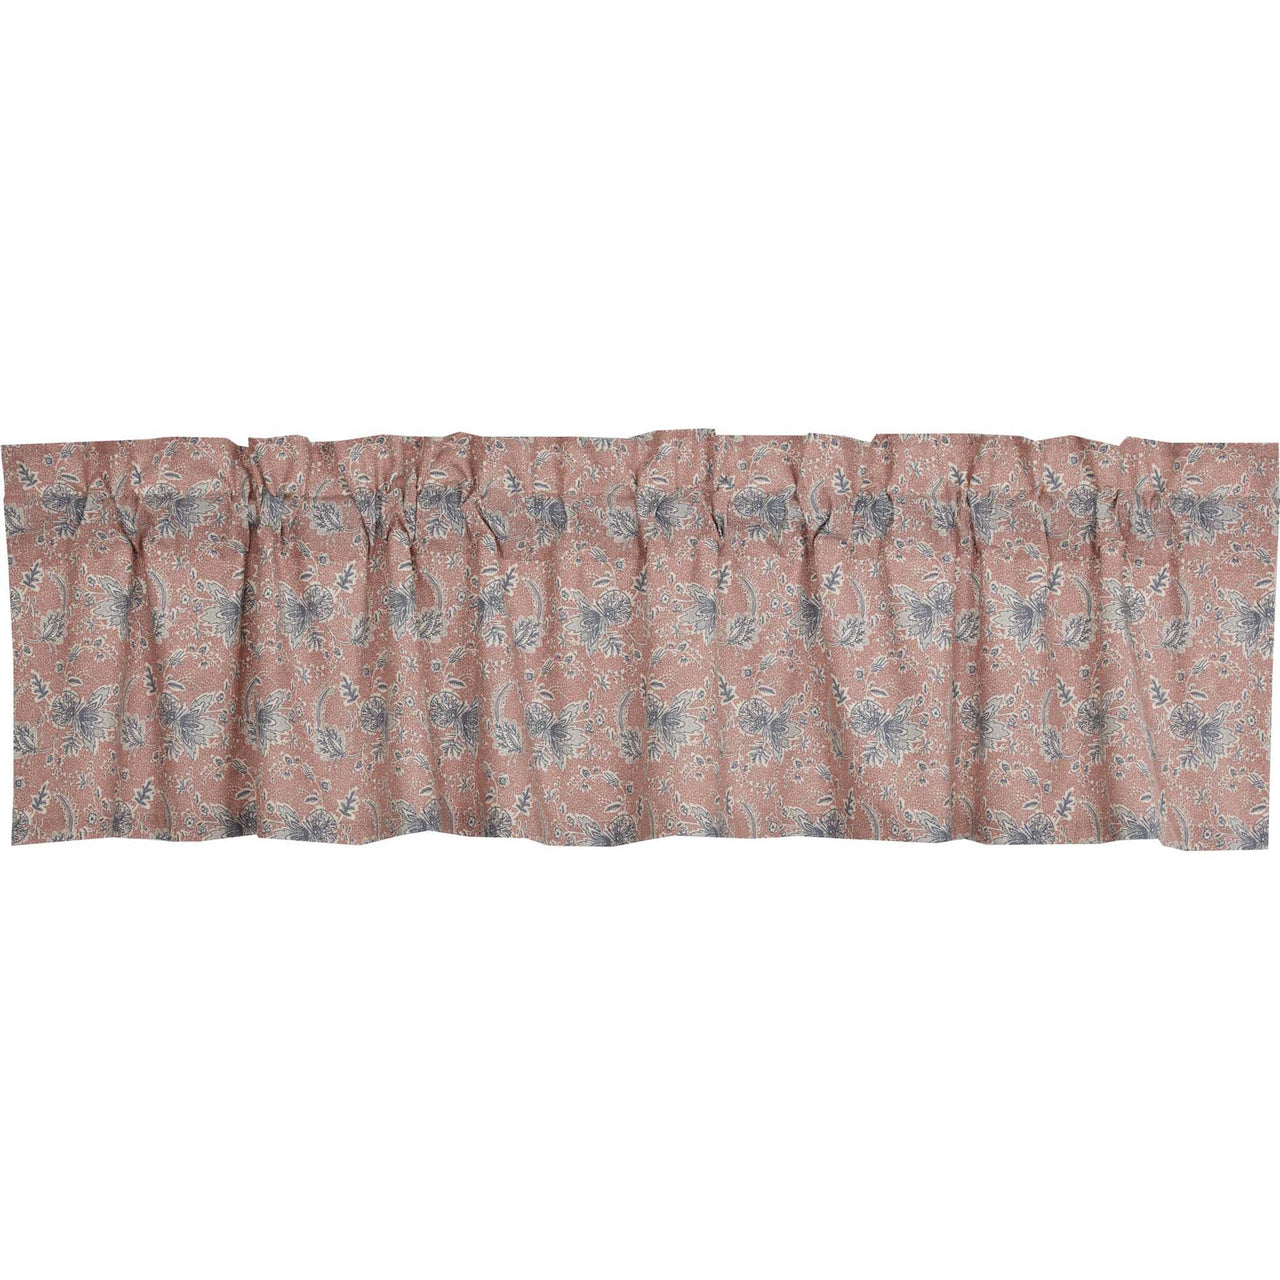 Kaila Floral Valance 16x72 VHC Brands